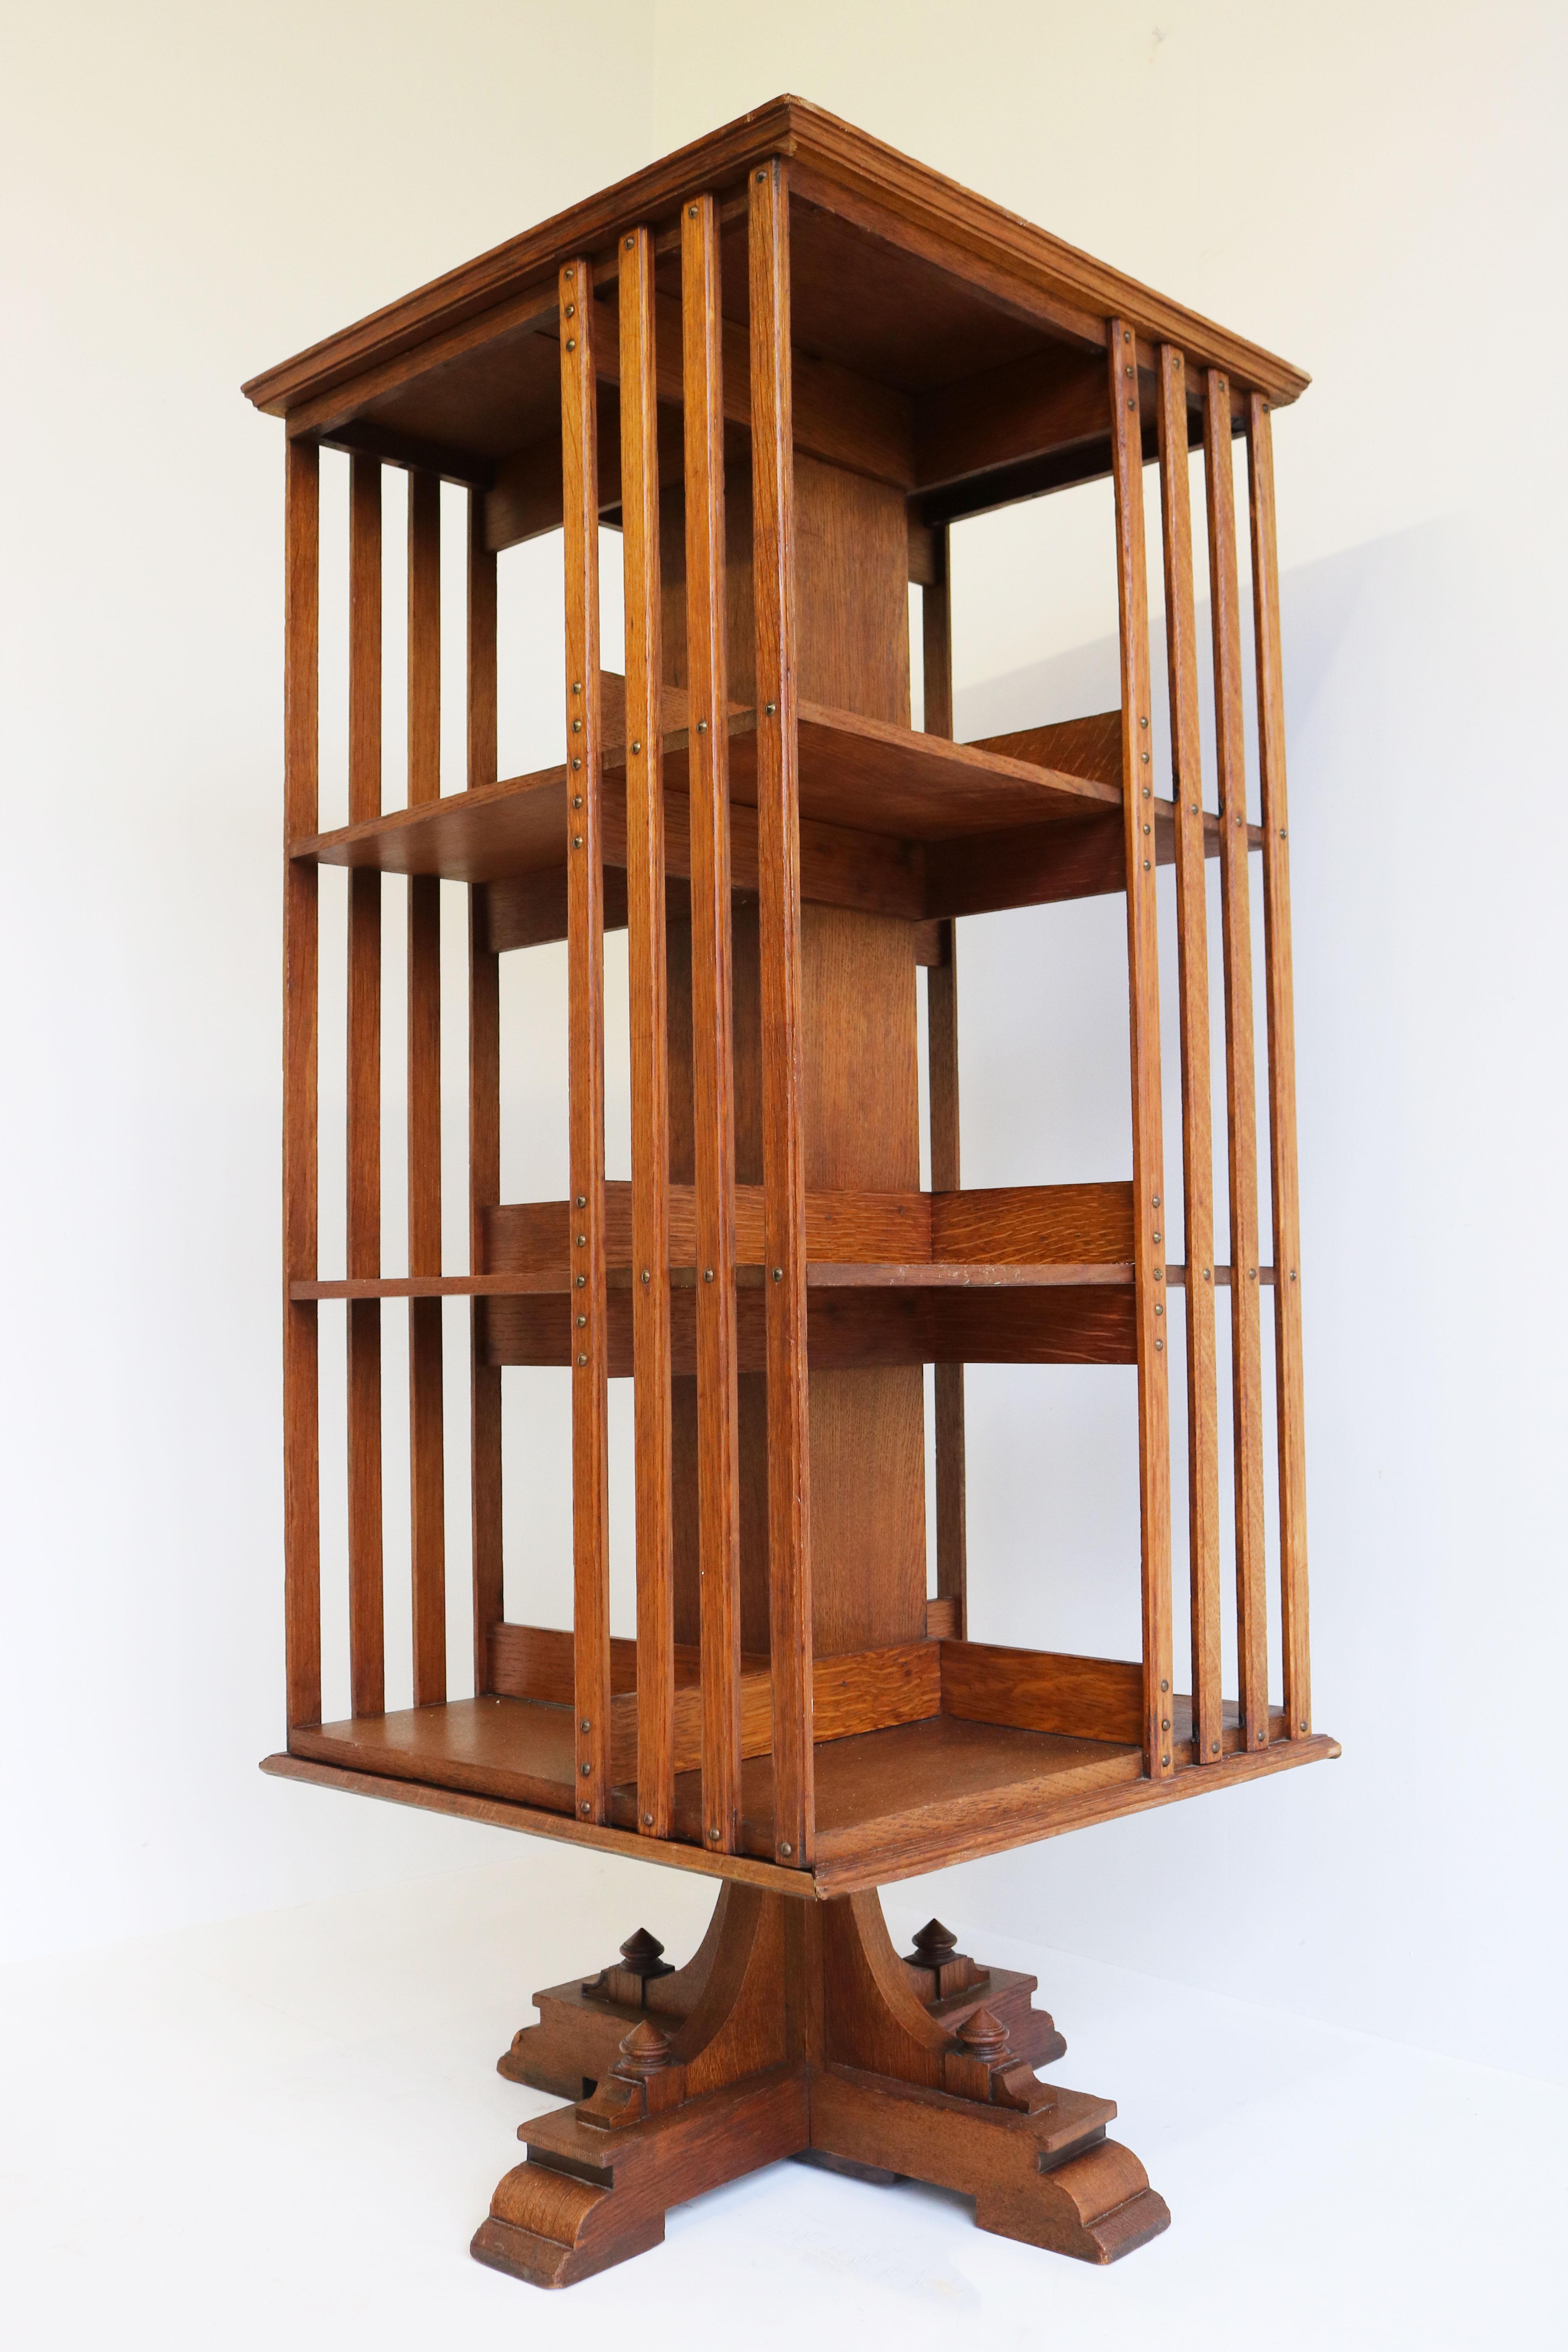 Hand-Crafted Rare Large Antique French Art Deco Revolving Bookcase Oak Study Library Office For Sale